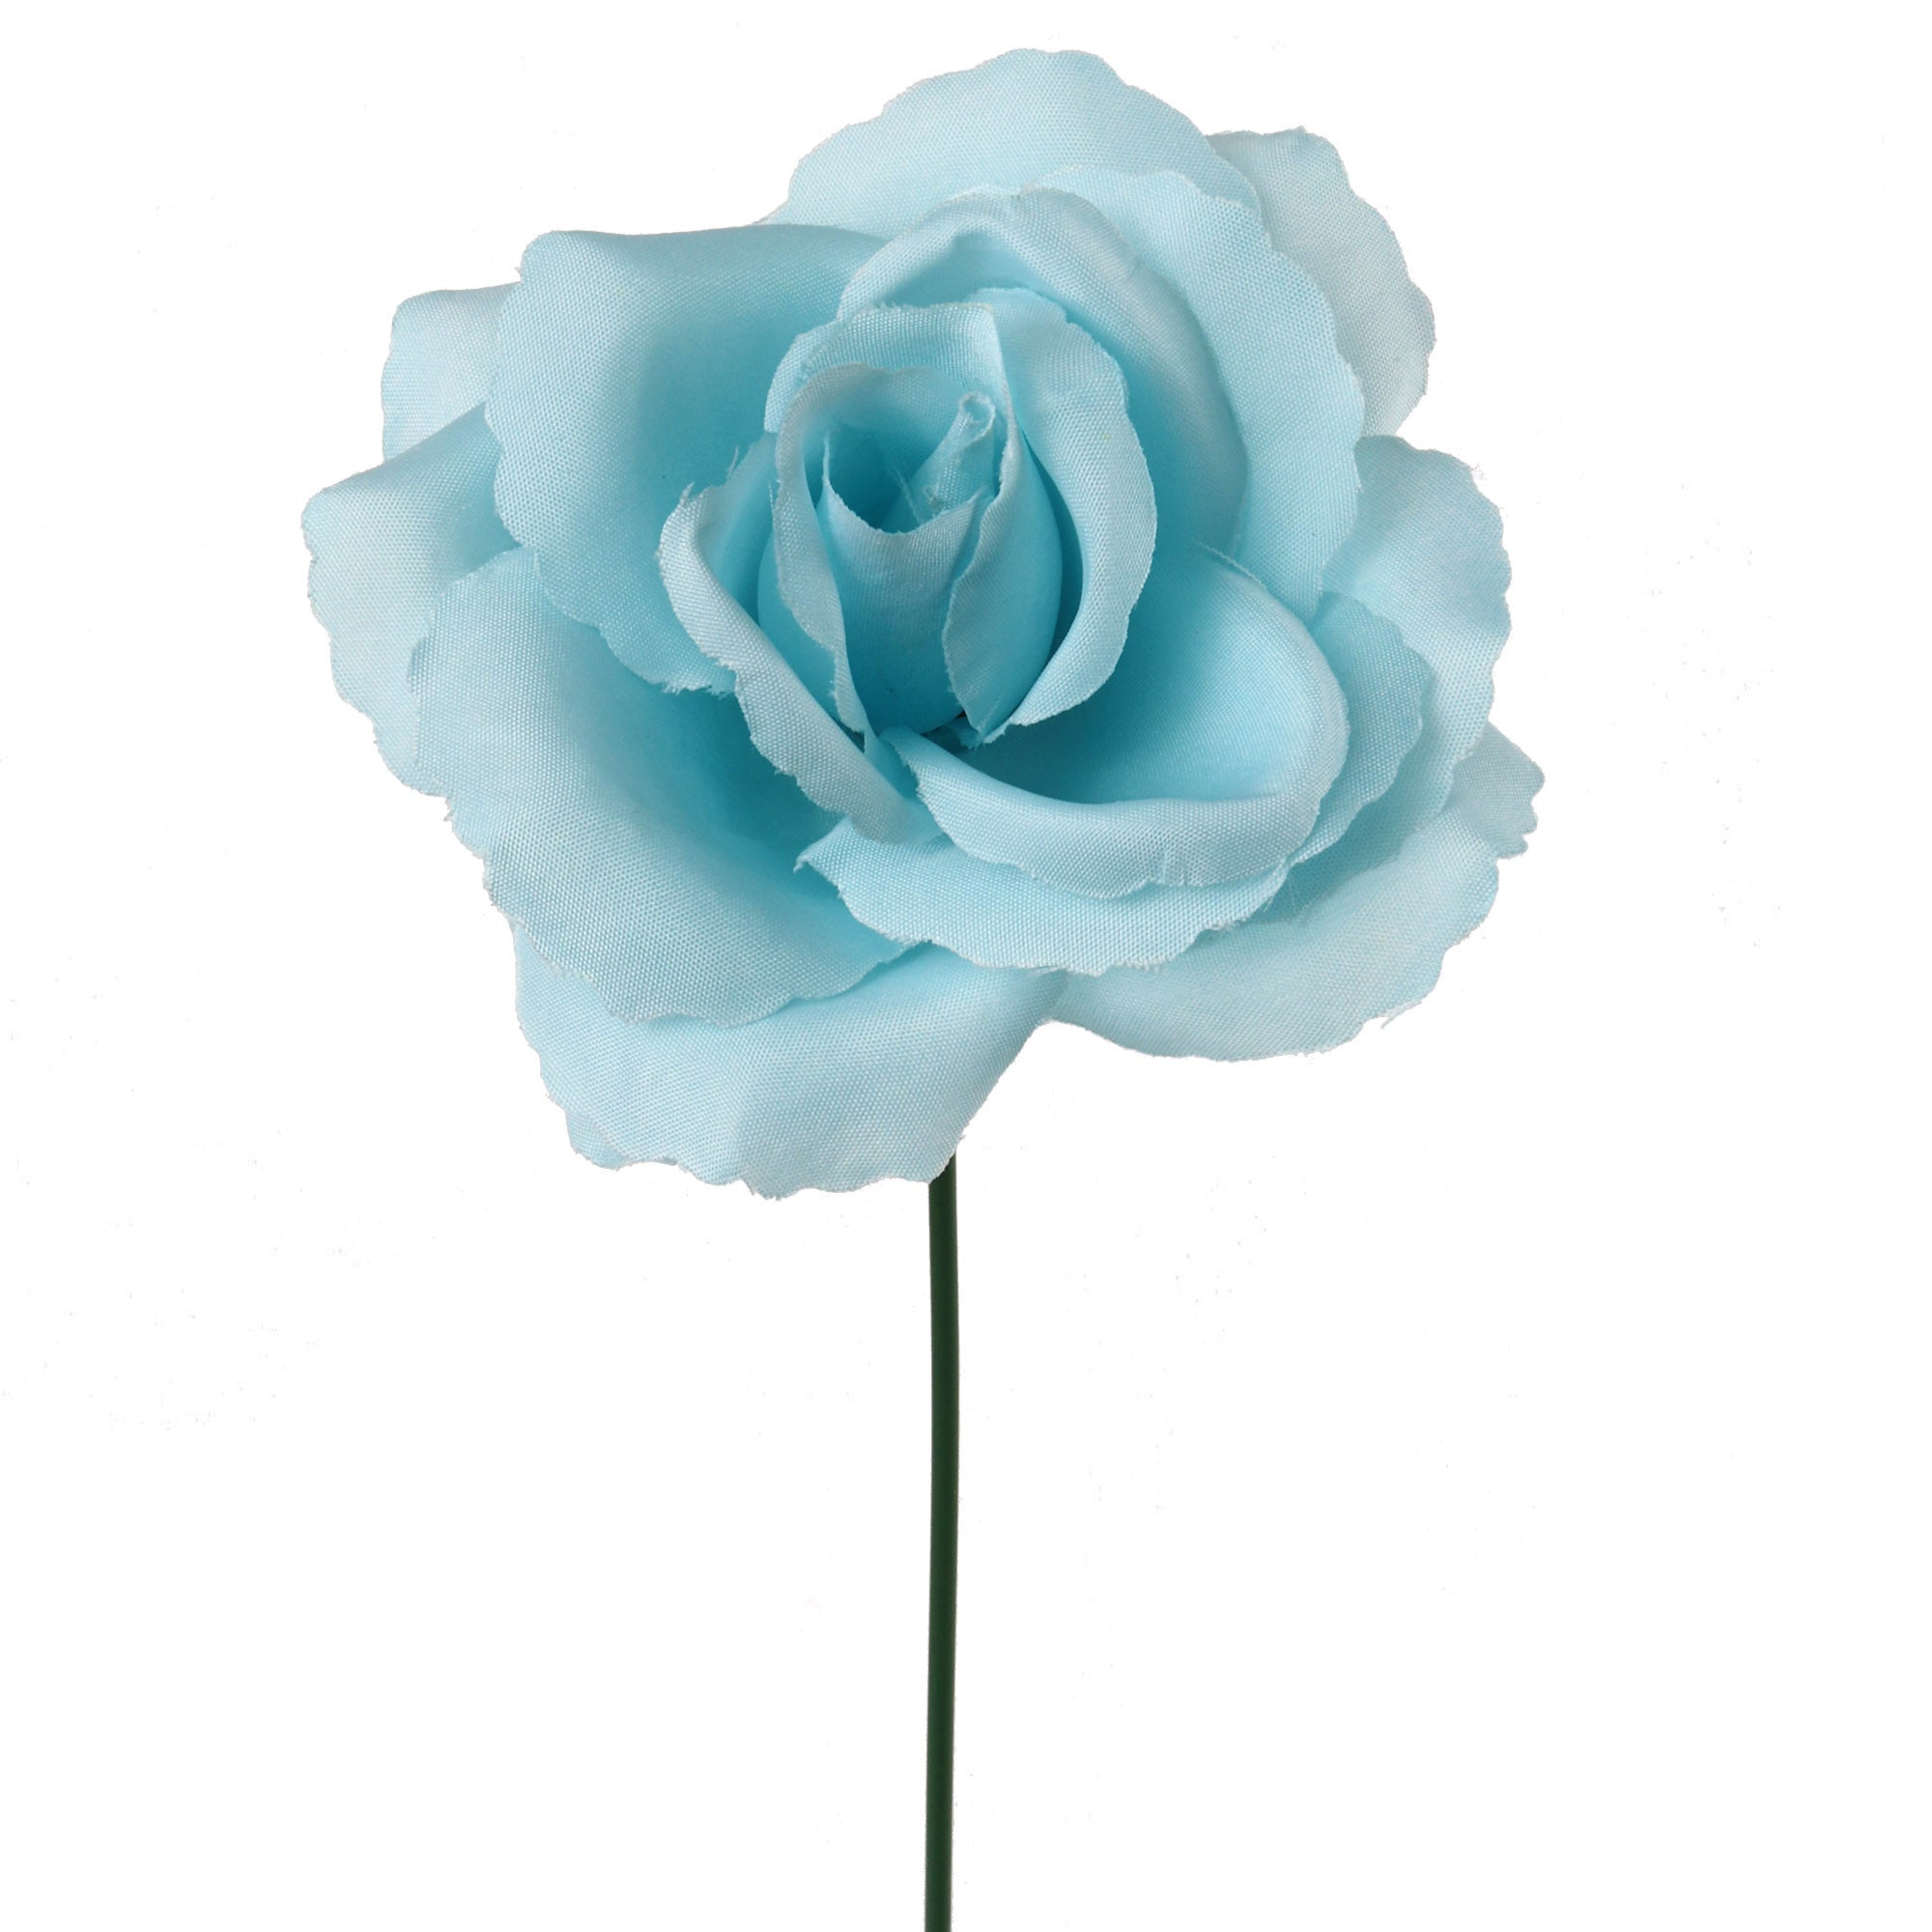 Artificial 8" Sky Blue Rose Picks with 3" Diameter, 50pc Set - Realistic Faux Flowers for Home Decor, Weddings, and Events - Easy-to-Arrange  ArtificialFlowers   